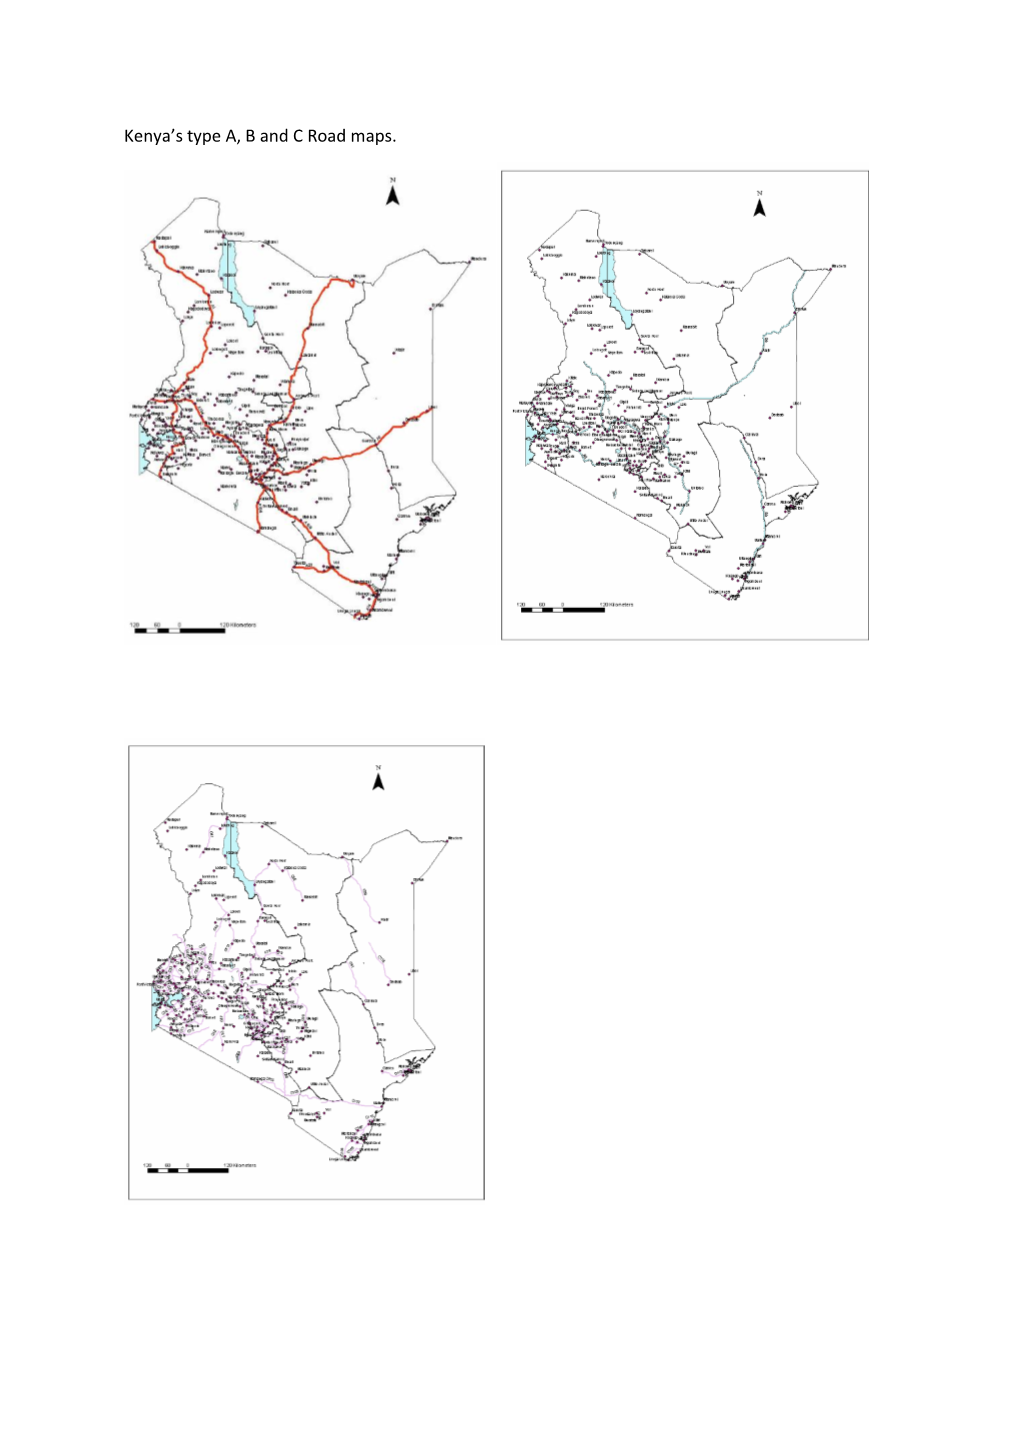 Kenya's Type A, B and C Road Maps